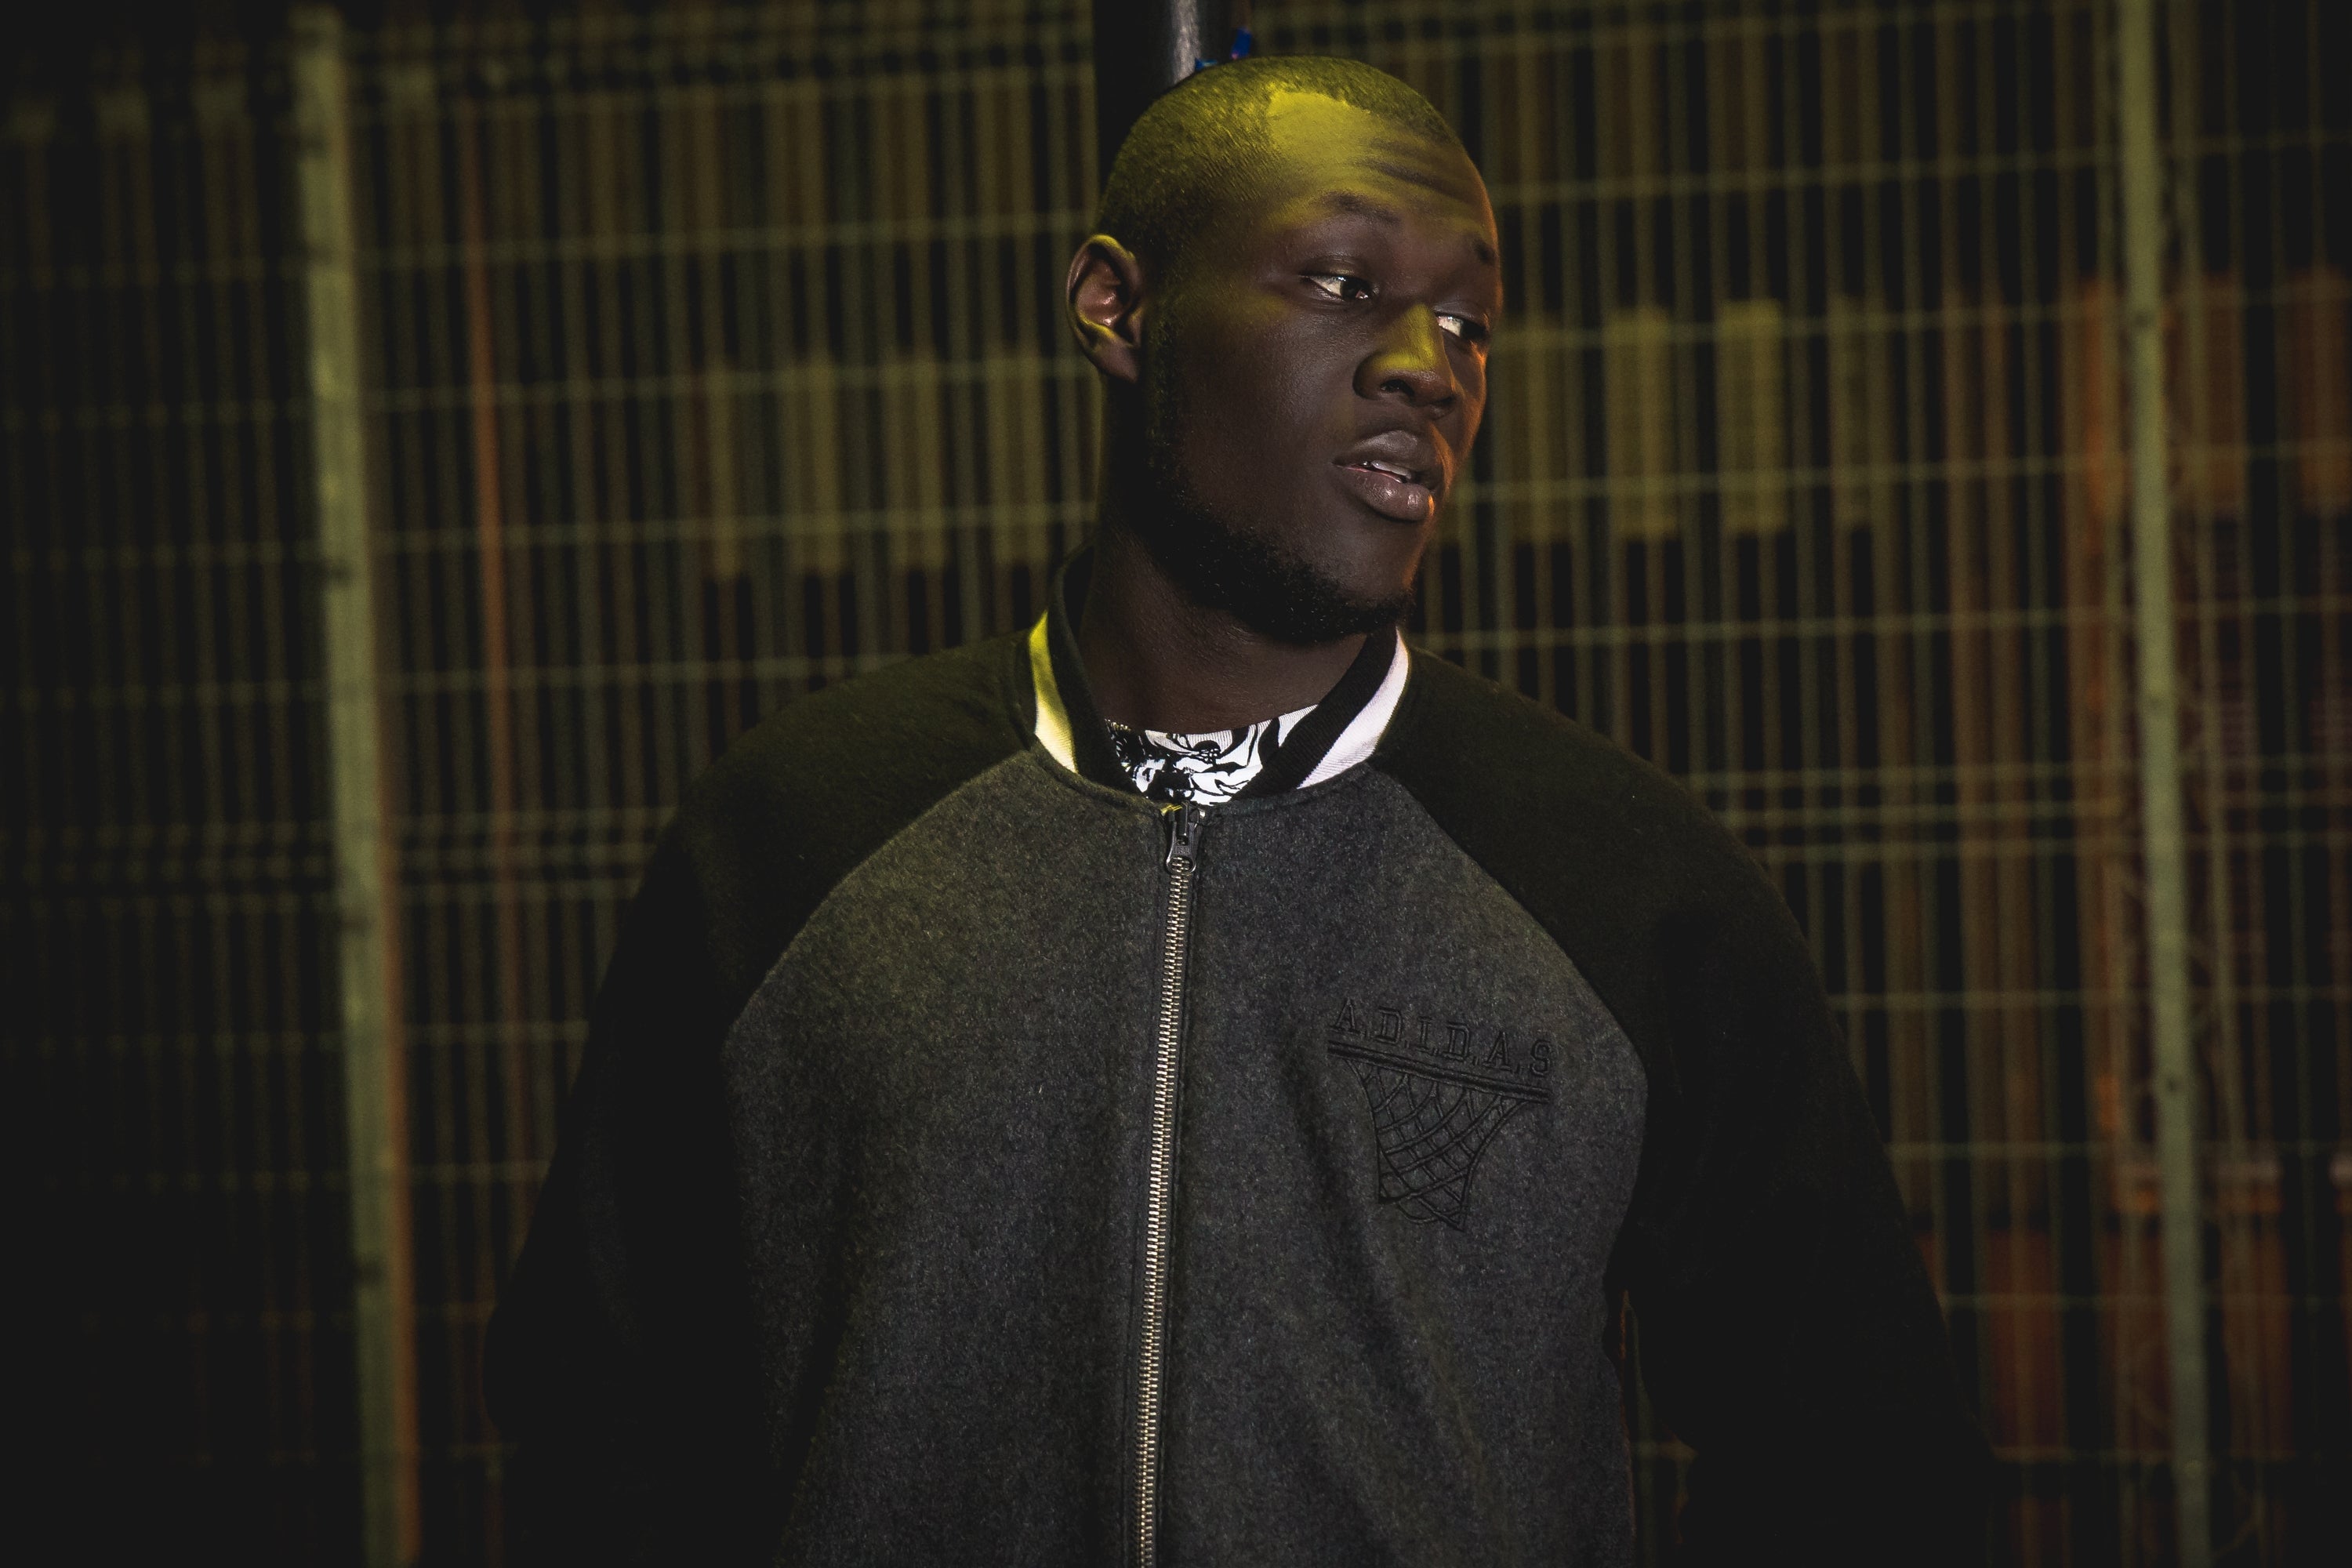 Up-and-coming artist Stormzy